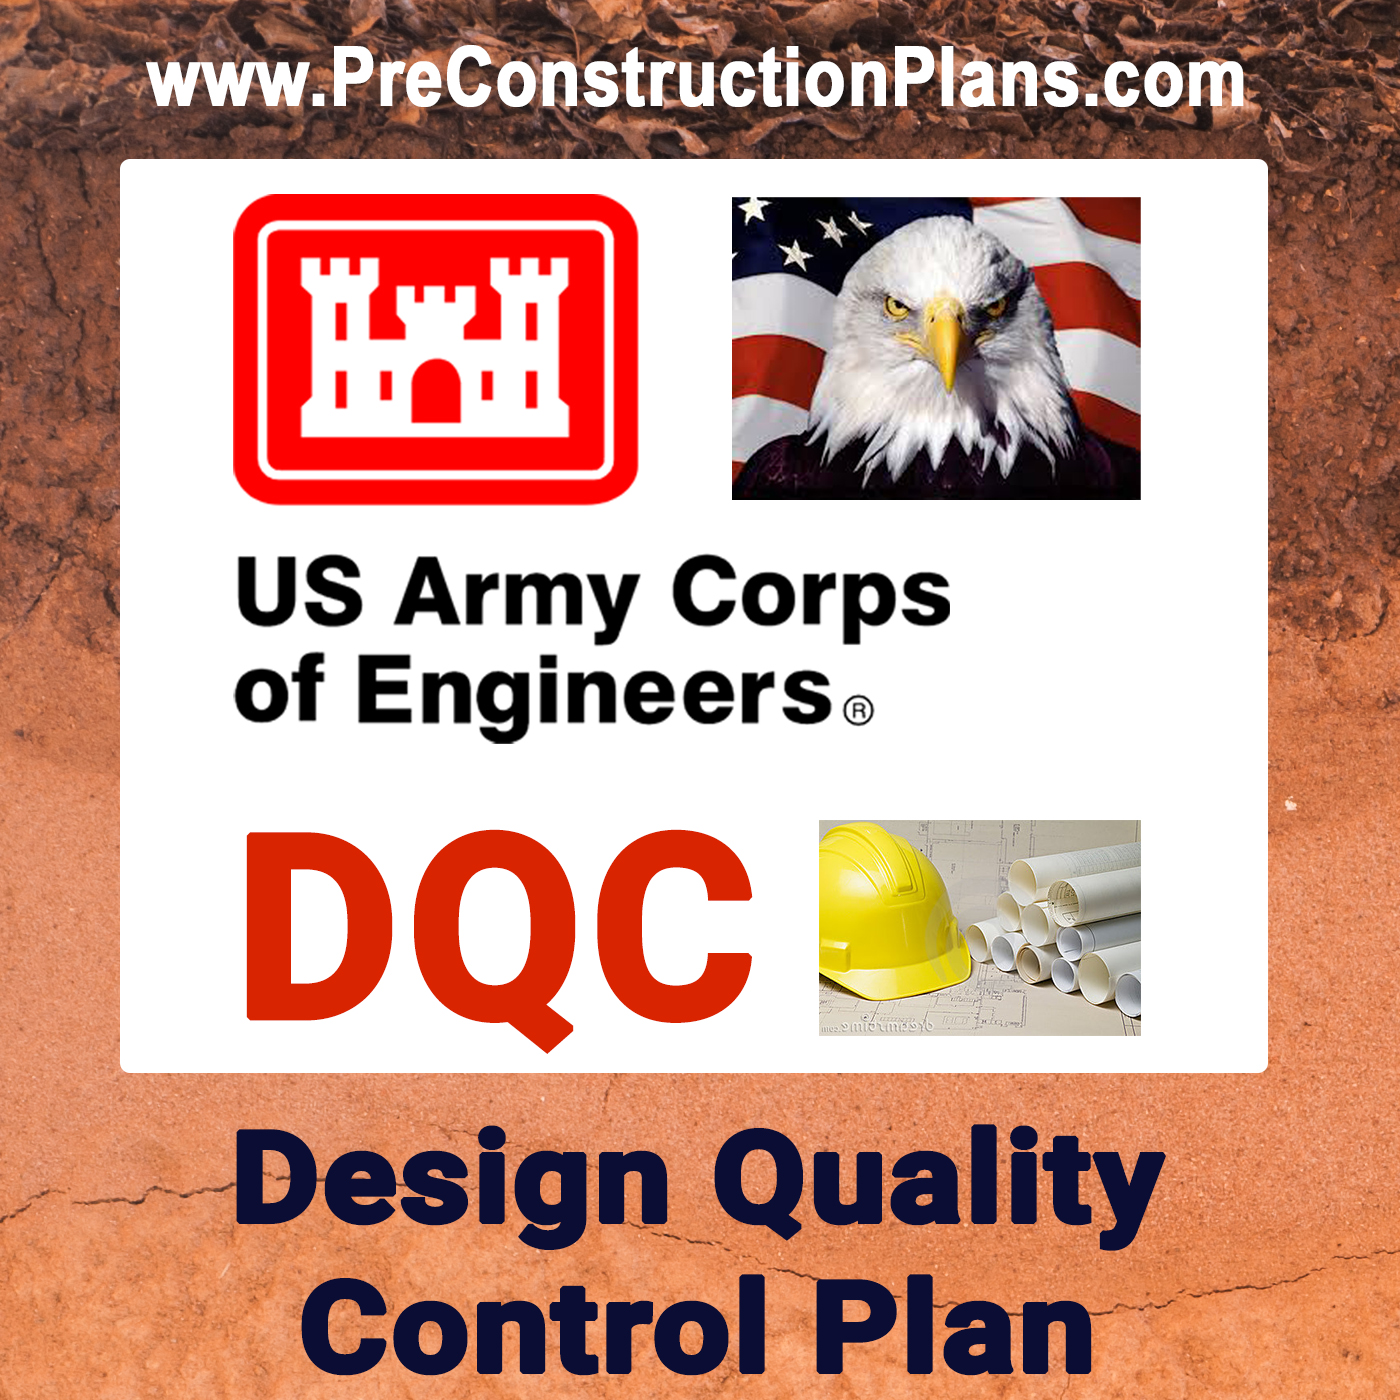 Download Free Samples — PreConstruction Plans